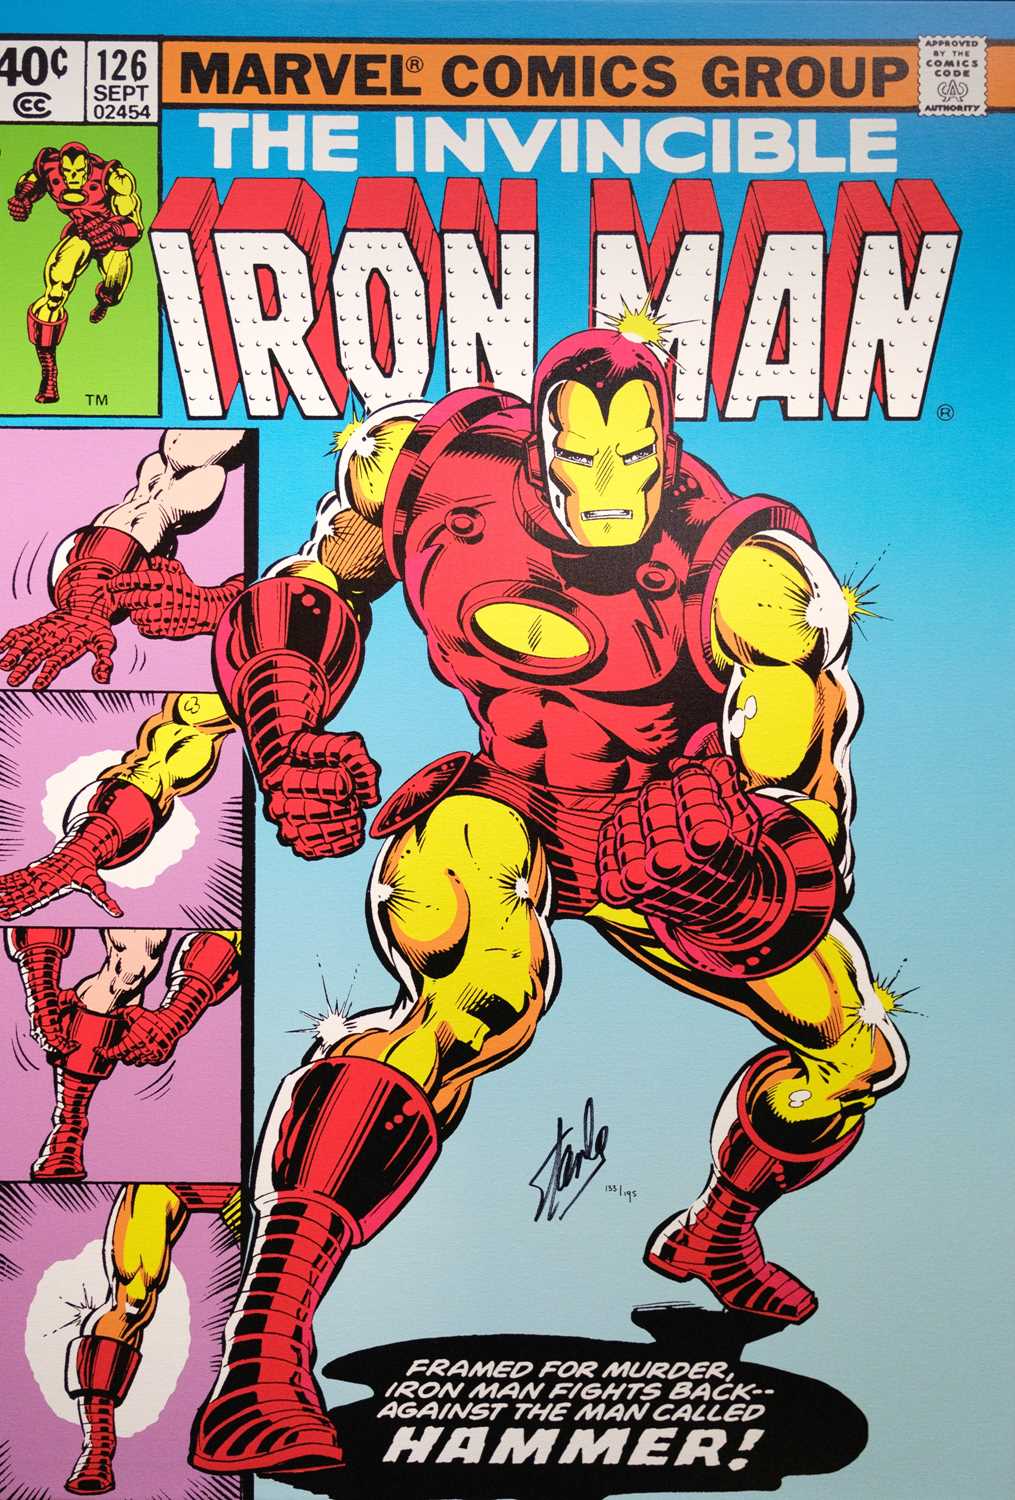 (Signed) Stan LEE (1922-2018) The Invincible Iron Man #126 - Iron Man Fights Back (2015) - Image 2 of 4